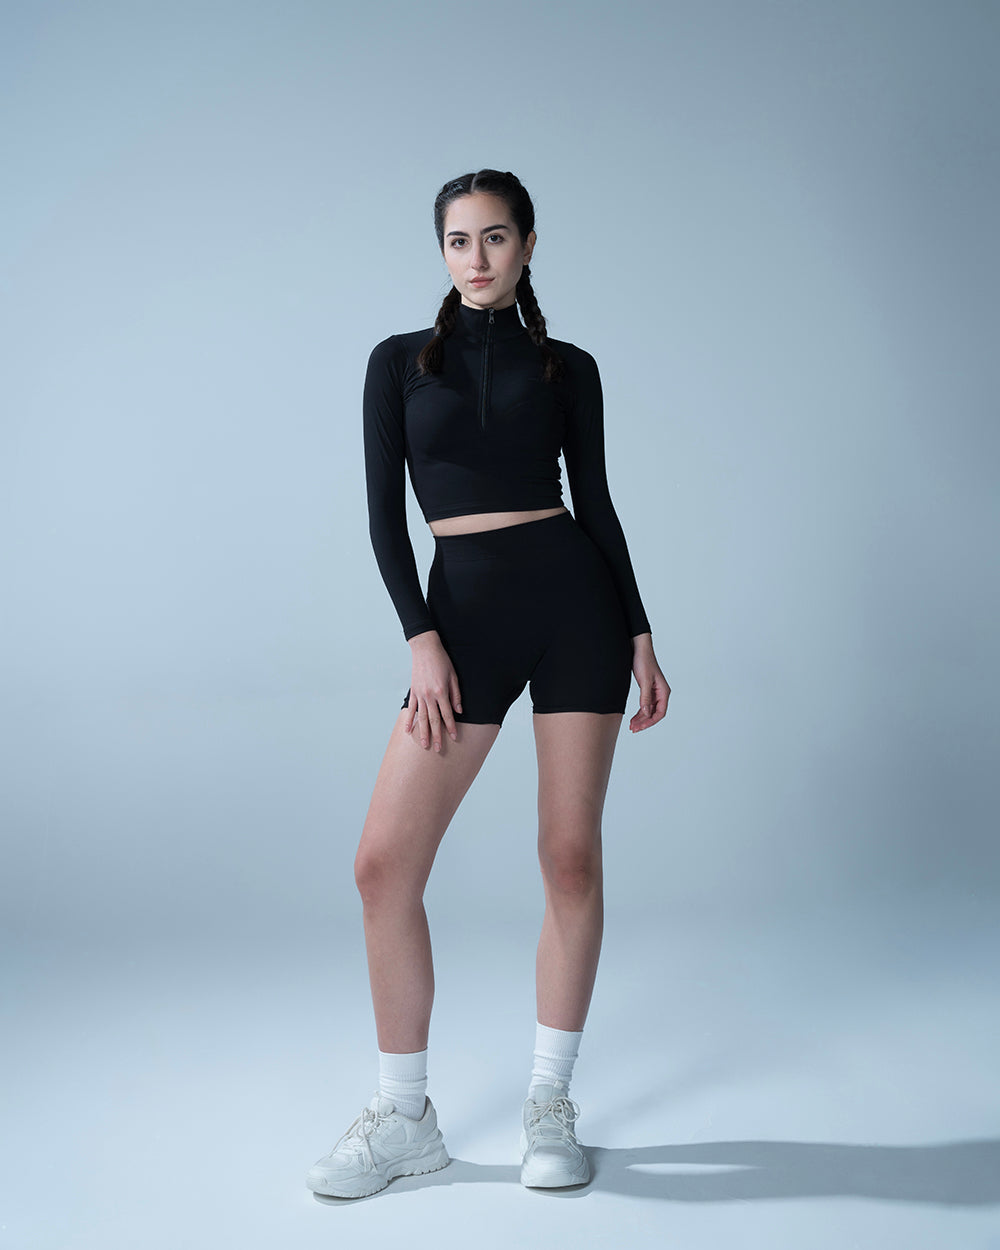 High Waisted Booty Shorts And Zipper Black Crop Top Set